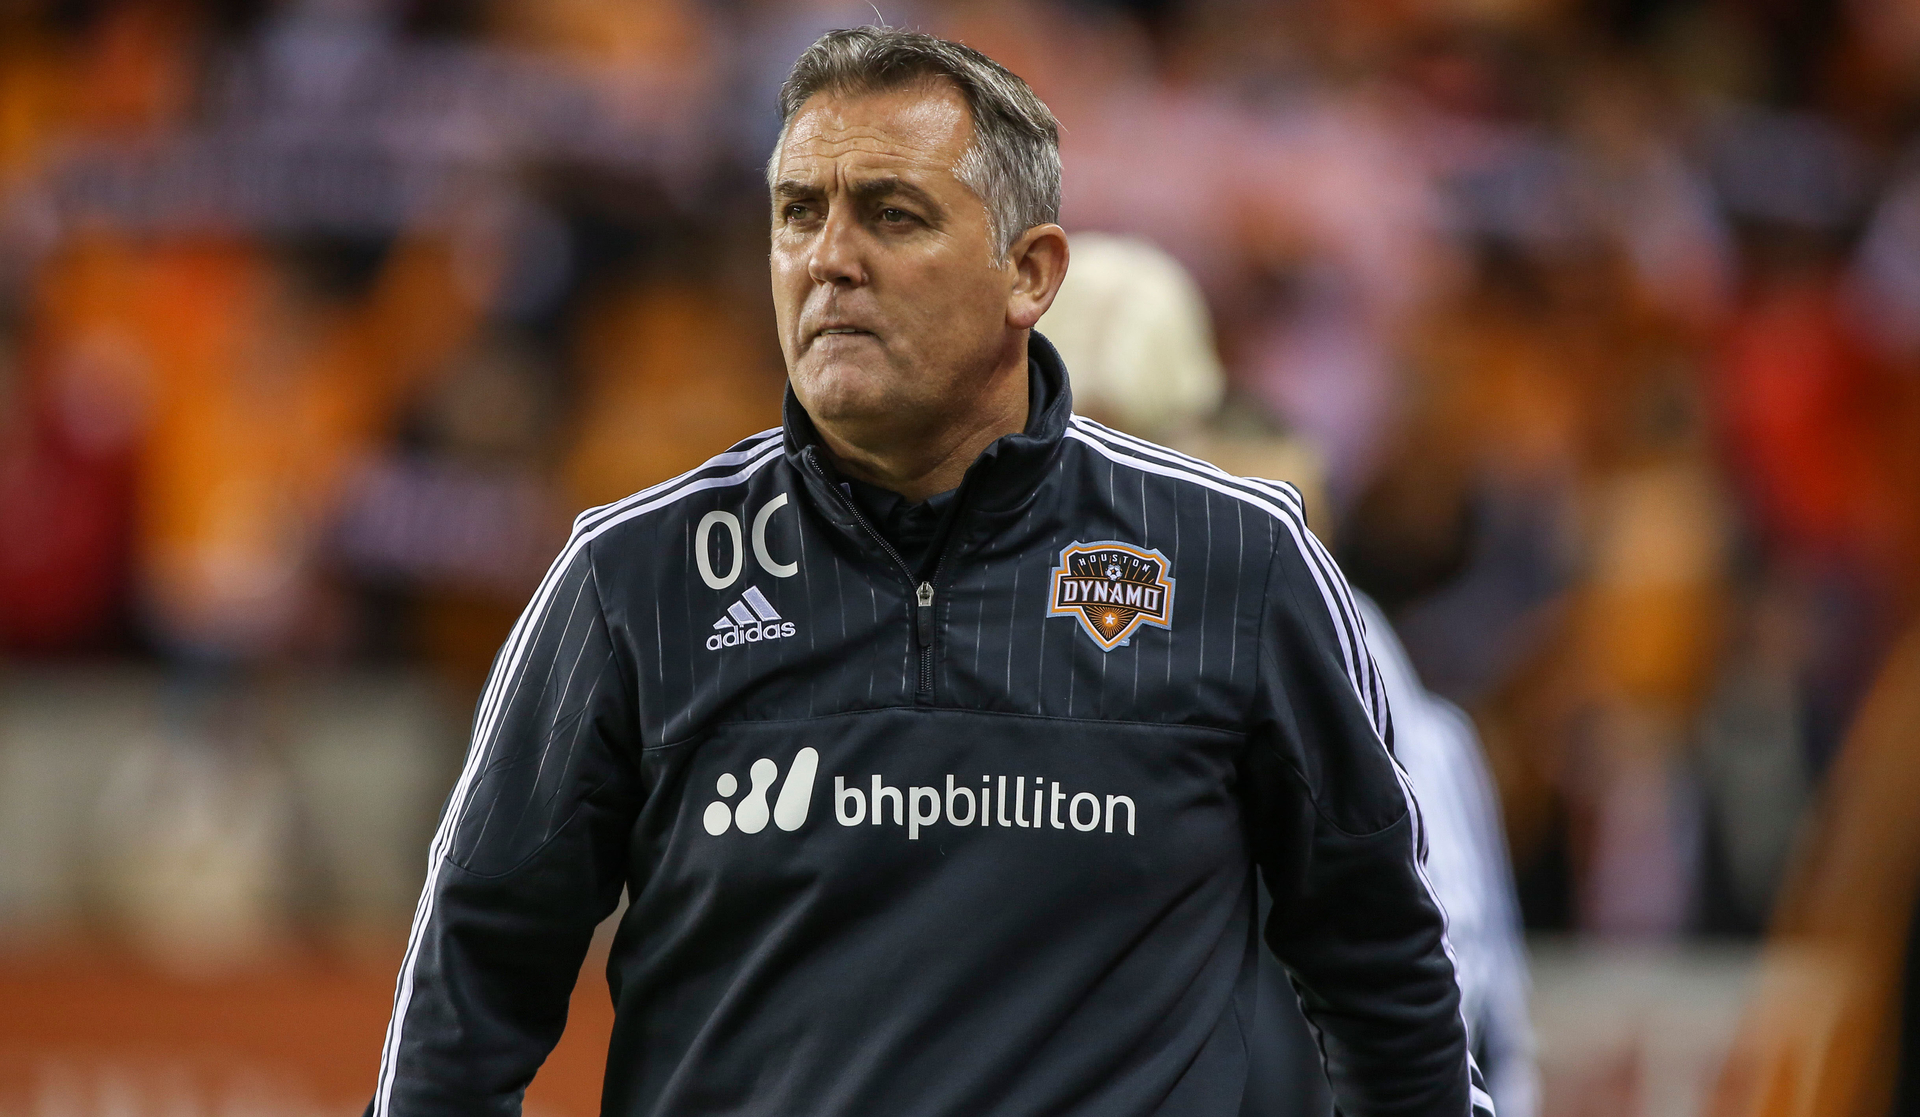 ISL: Chennaiyin FC rope in former Bolton Wanderers manager Owen Coyle